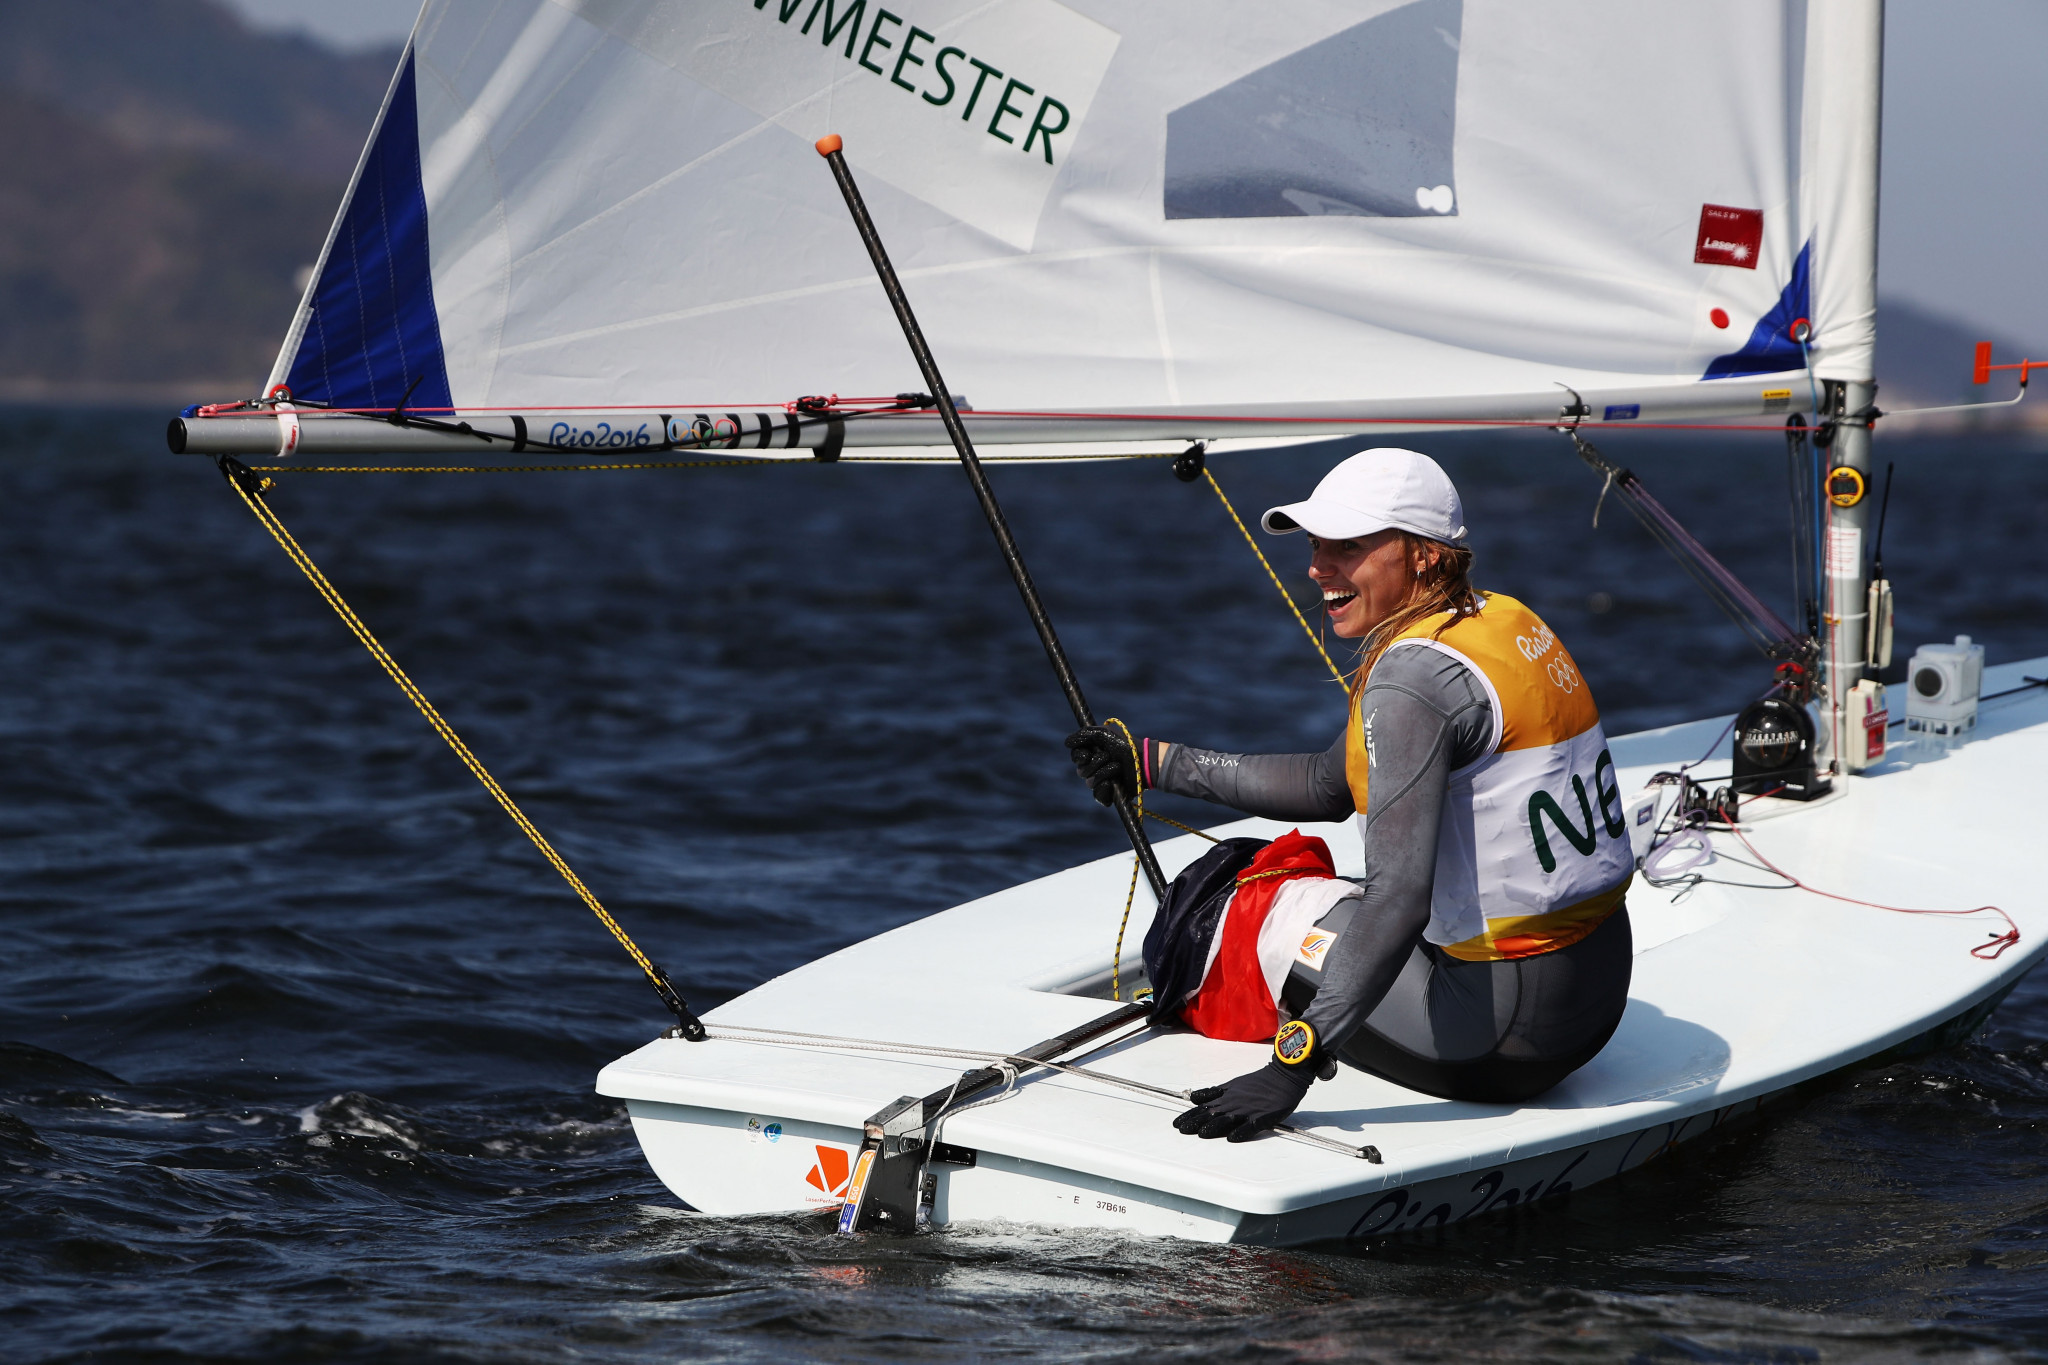 Olympic champion Marit Bouwmeester won the Laser Radial Women's World Championship ©Getty Images